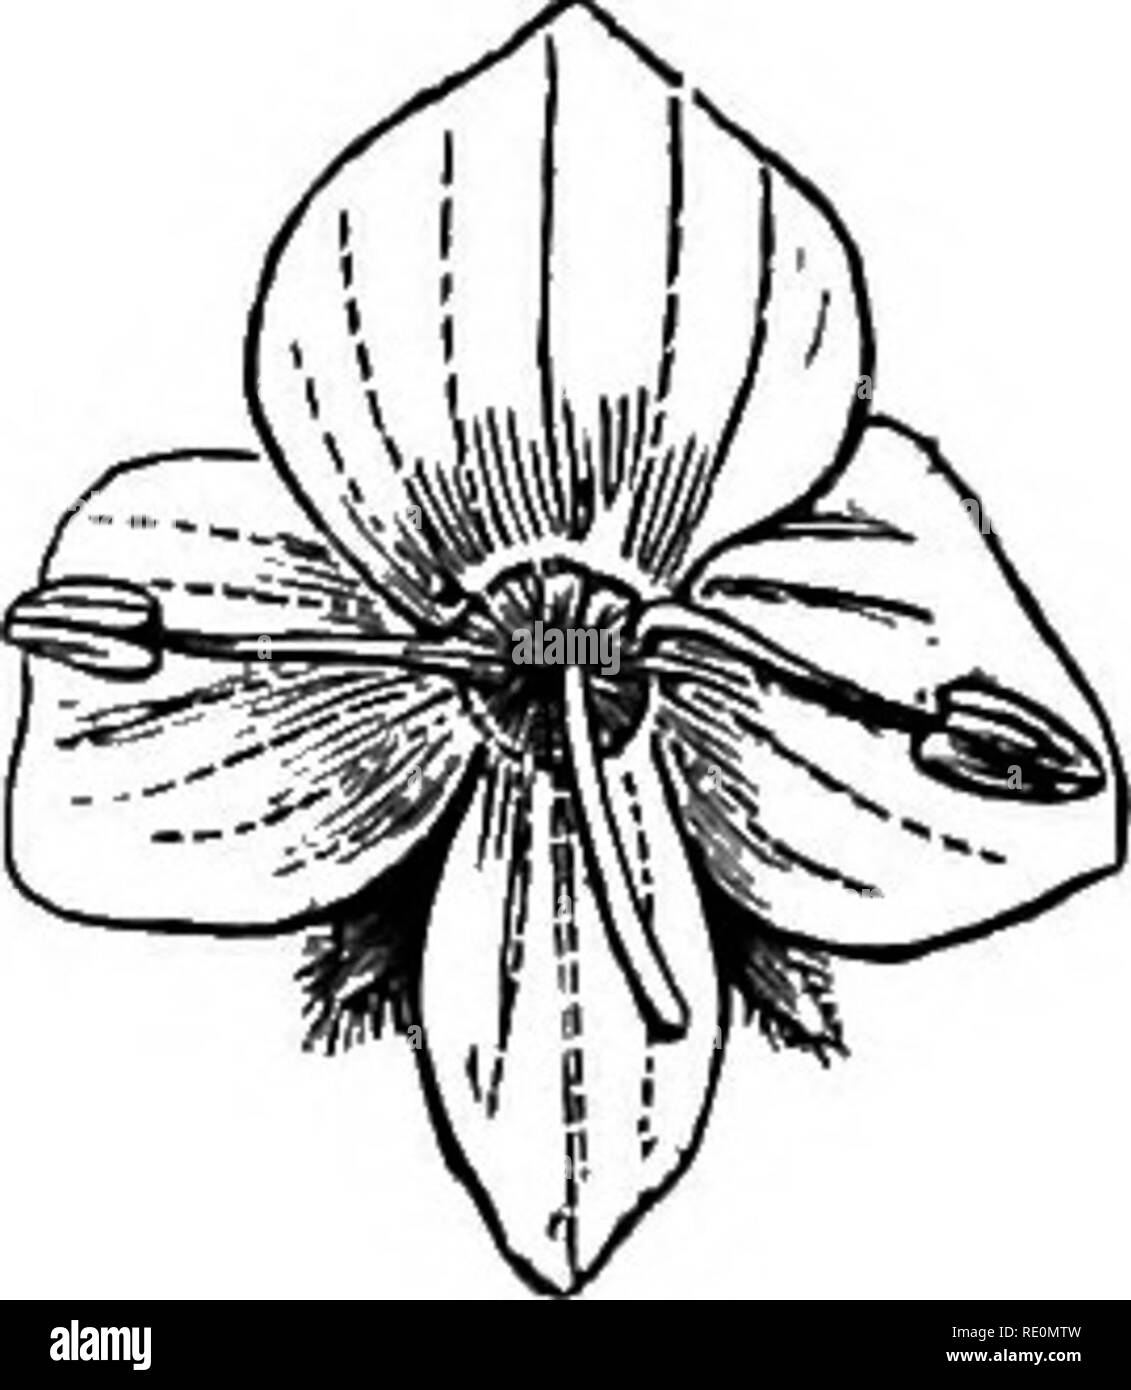 . A manual of botany. Botany. 394 MANUAL OF BOTANY induplicate. Stamens equal in number to the lobes of the corolla. Illustrative Genera :—Oestrum, Linn.; Solanum, Lirin. Sub-order 2. Ateope^.—^Estivation of the corolla imbricate, or some modification of imbricate. Stamens equal in number to the lobes of the corolla, one occasionally sterile. Illus- trative Genera:—Atropa, Linn.; Lycium, Linn. Distribution and Numbers.—They are scattered over most parts of the globe except the polar circles, but are most abun- dant in'tropical regions. This order, as defined above, contains about 1,120 species Stock Photo